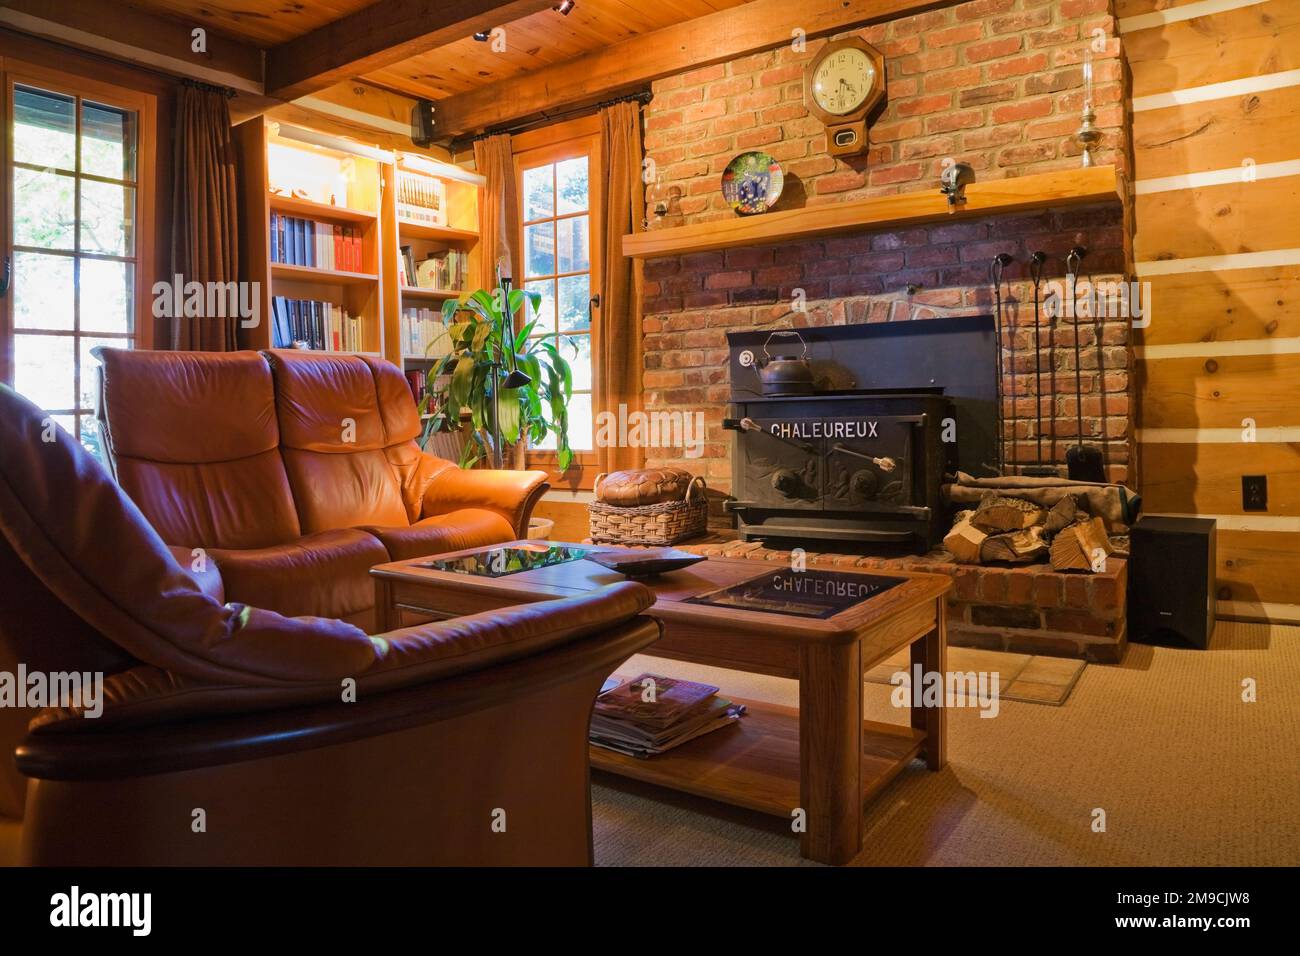 Brown leather sofas, wooden coffee table with glass tops in front of red brick wood burning stove in living room inside Canadiana style log home. Stock Photo